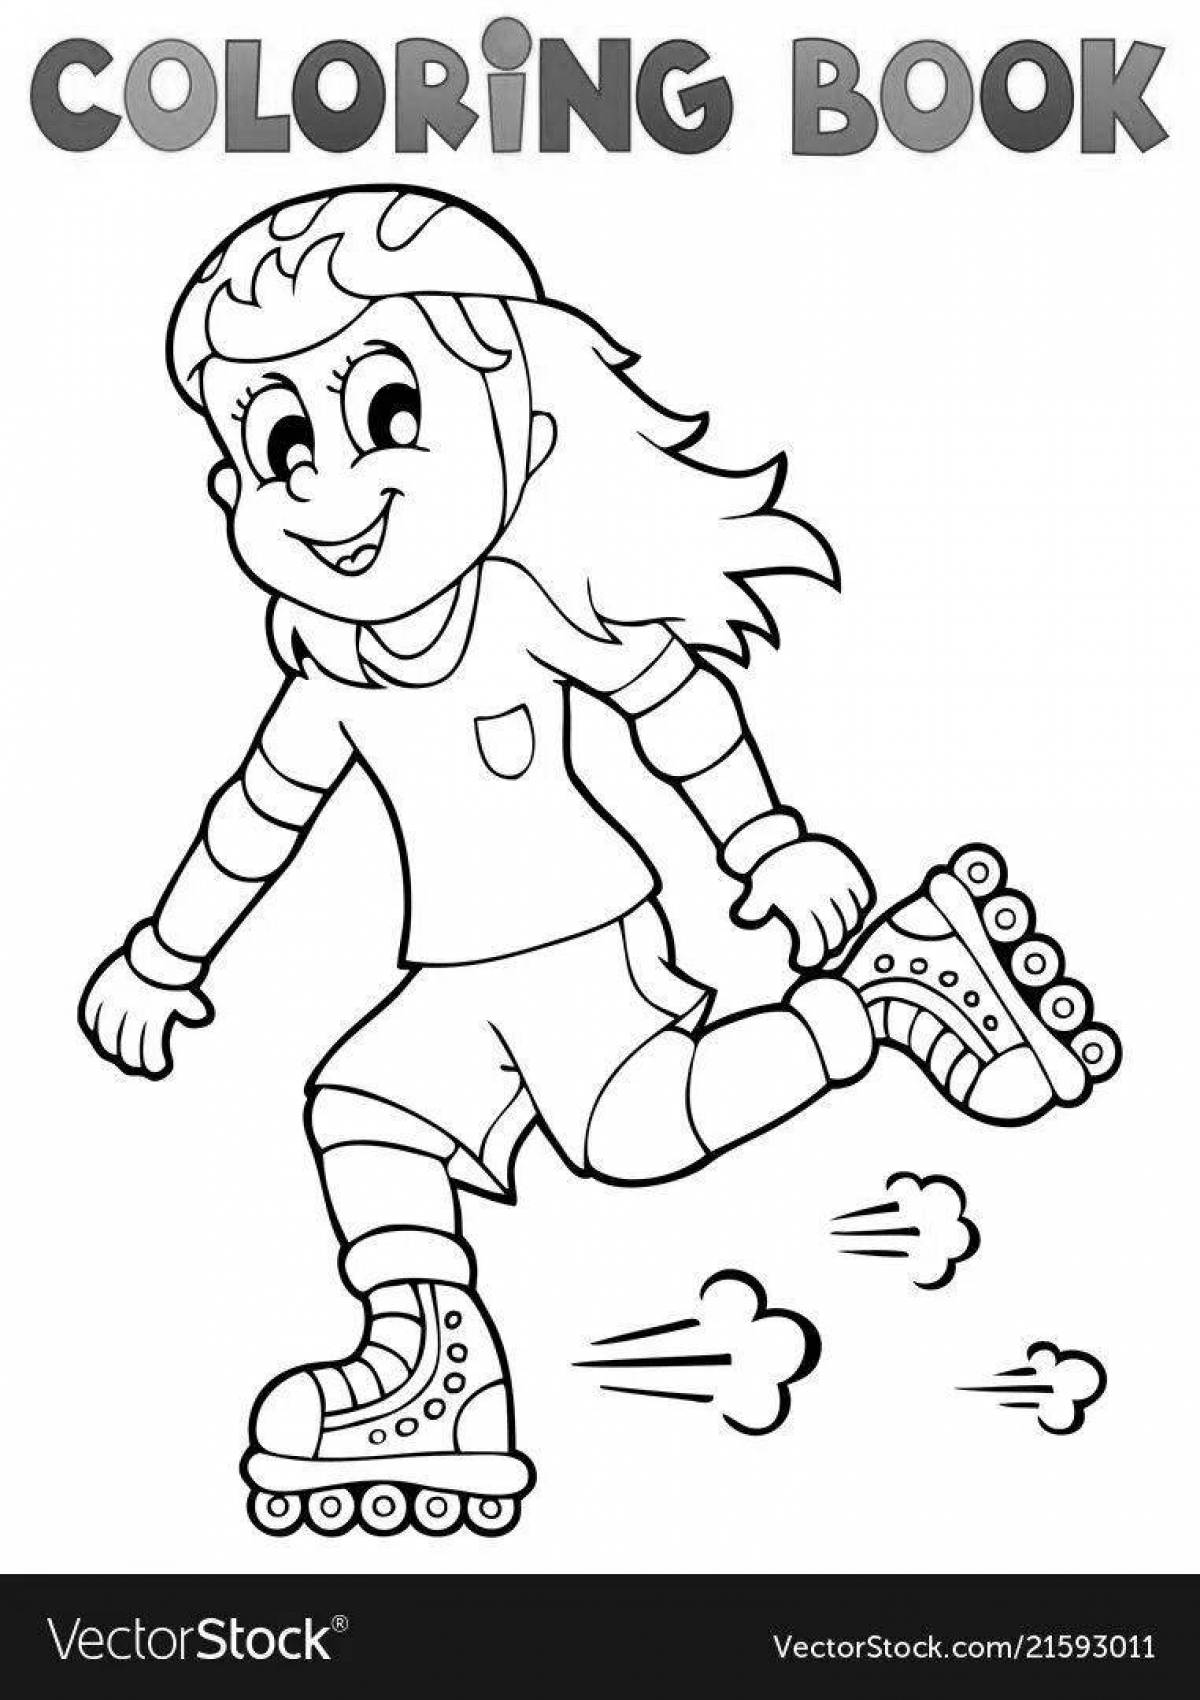 Playful sports and health coloring book for kids